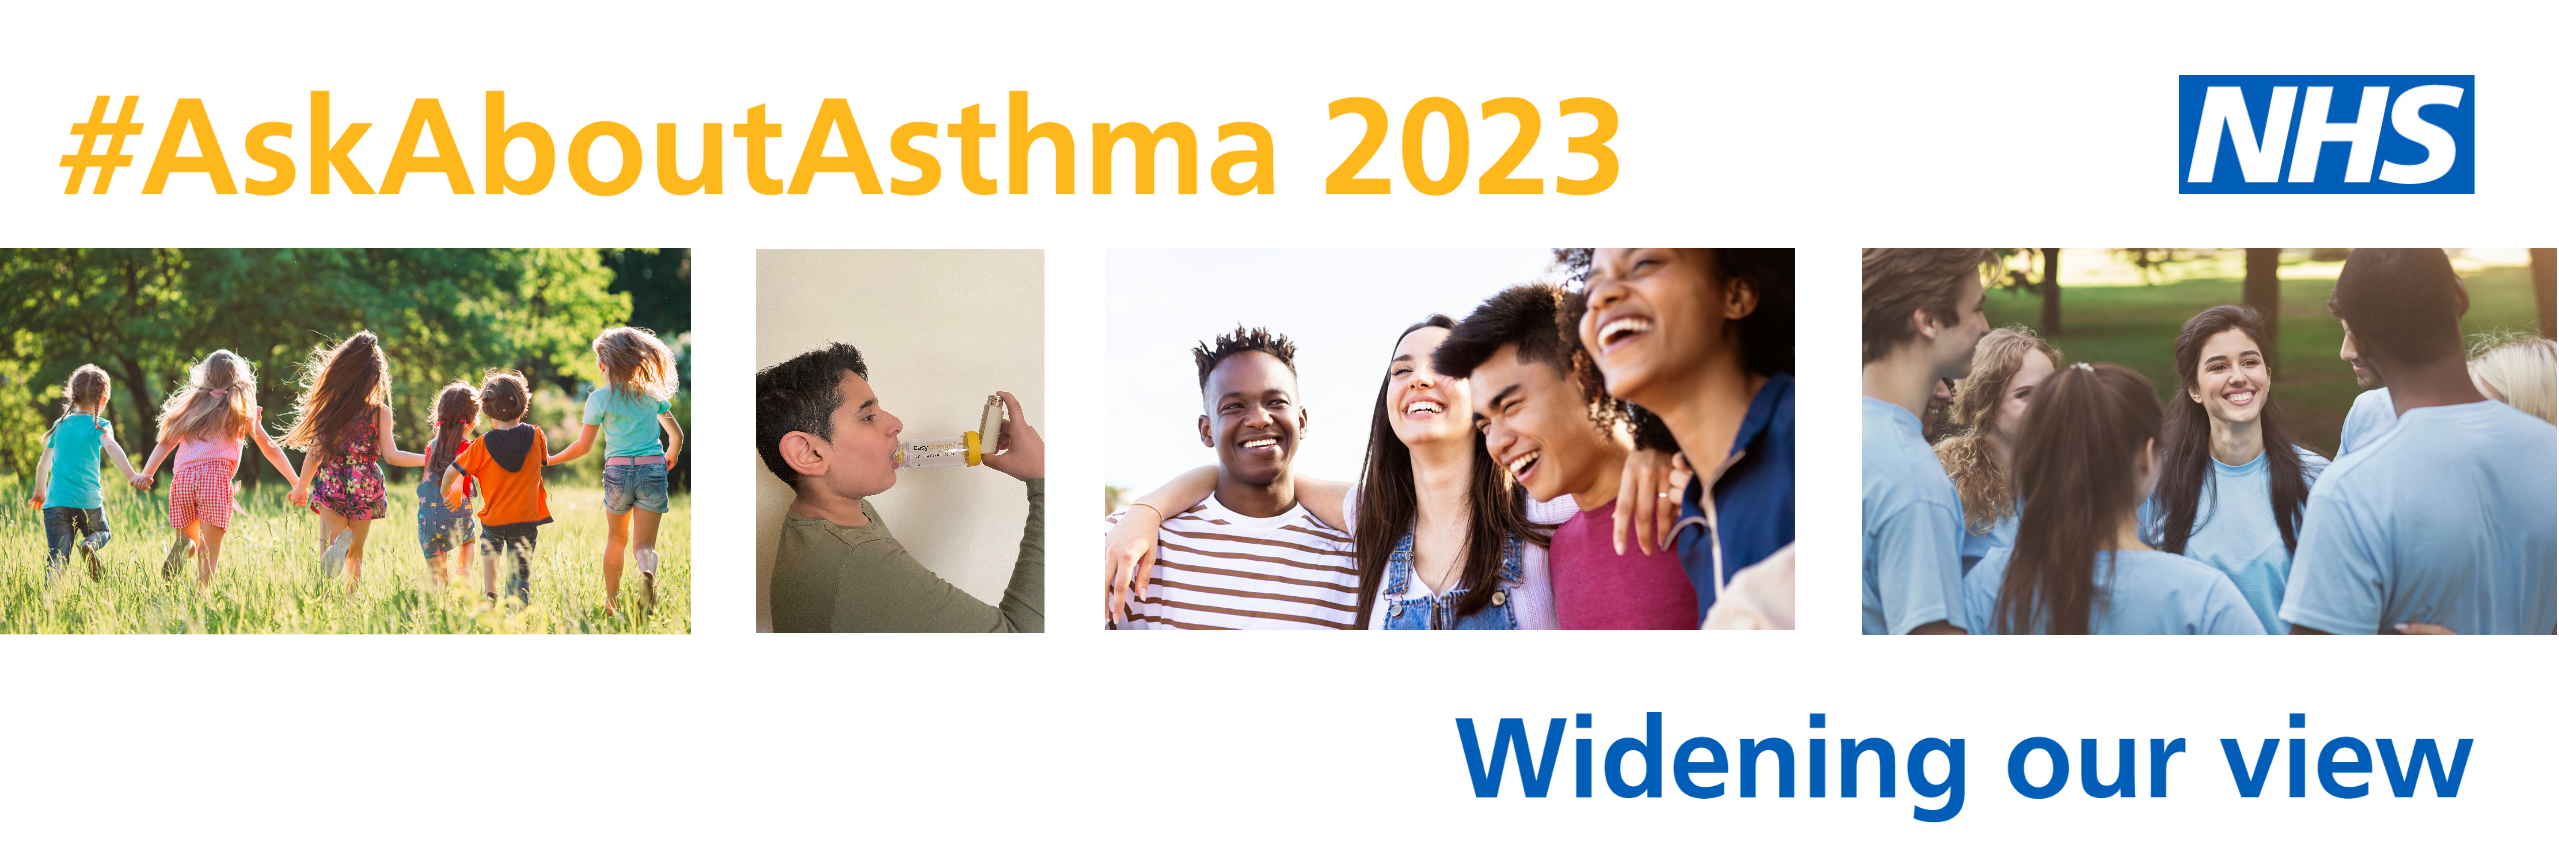 Images of six children running on a field; a young boy using an asthma inhaler. Four young people laughing; a group of seven young people. On top left, text reads "#AskAboutAsthma 2023". On top right, NHS logo. On bottom right, text reads "Widening our view"